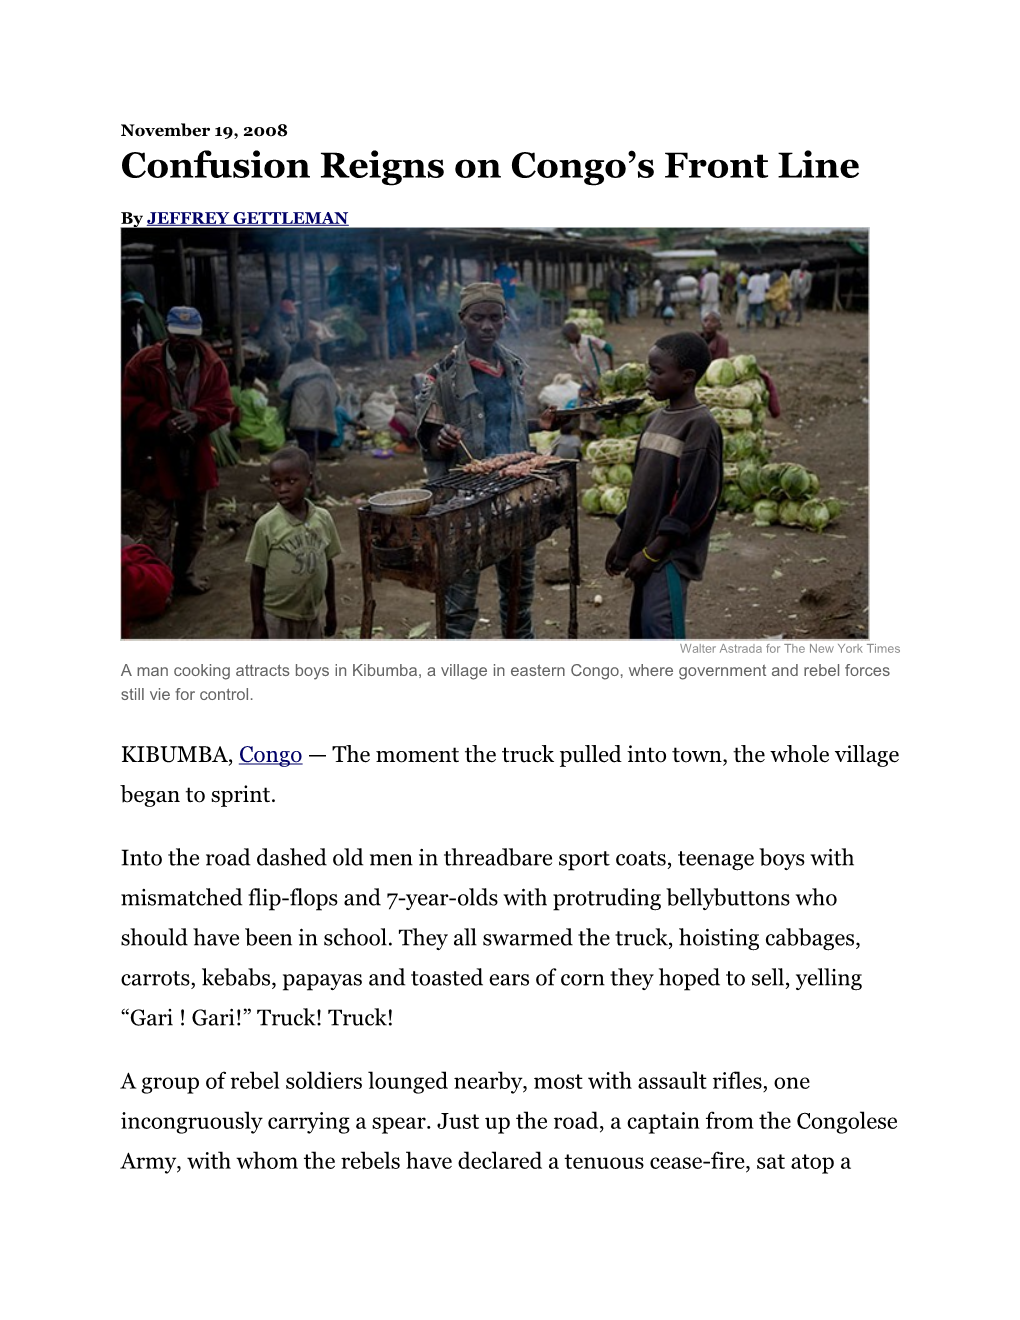 Confusion Reigns on Congo S Front Line